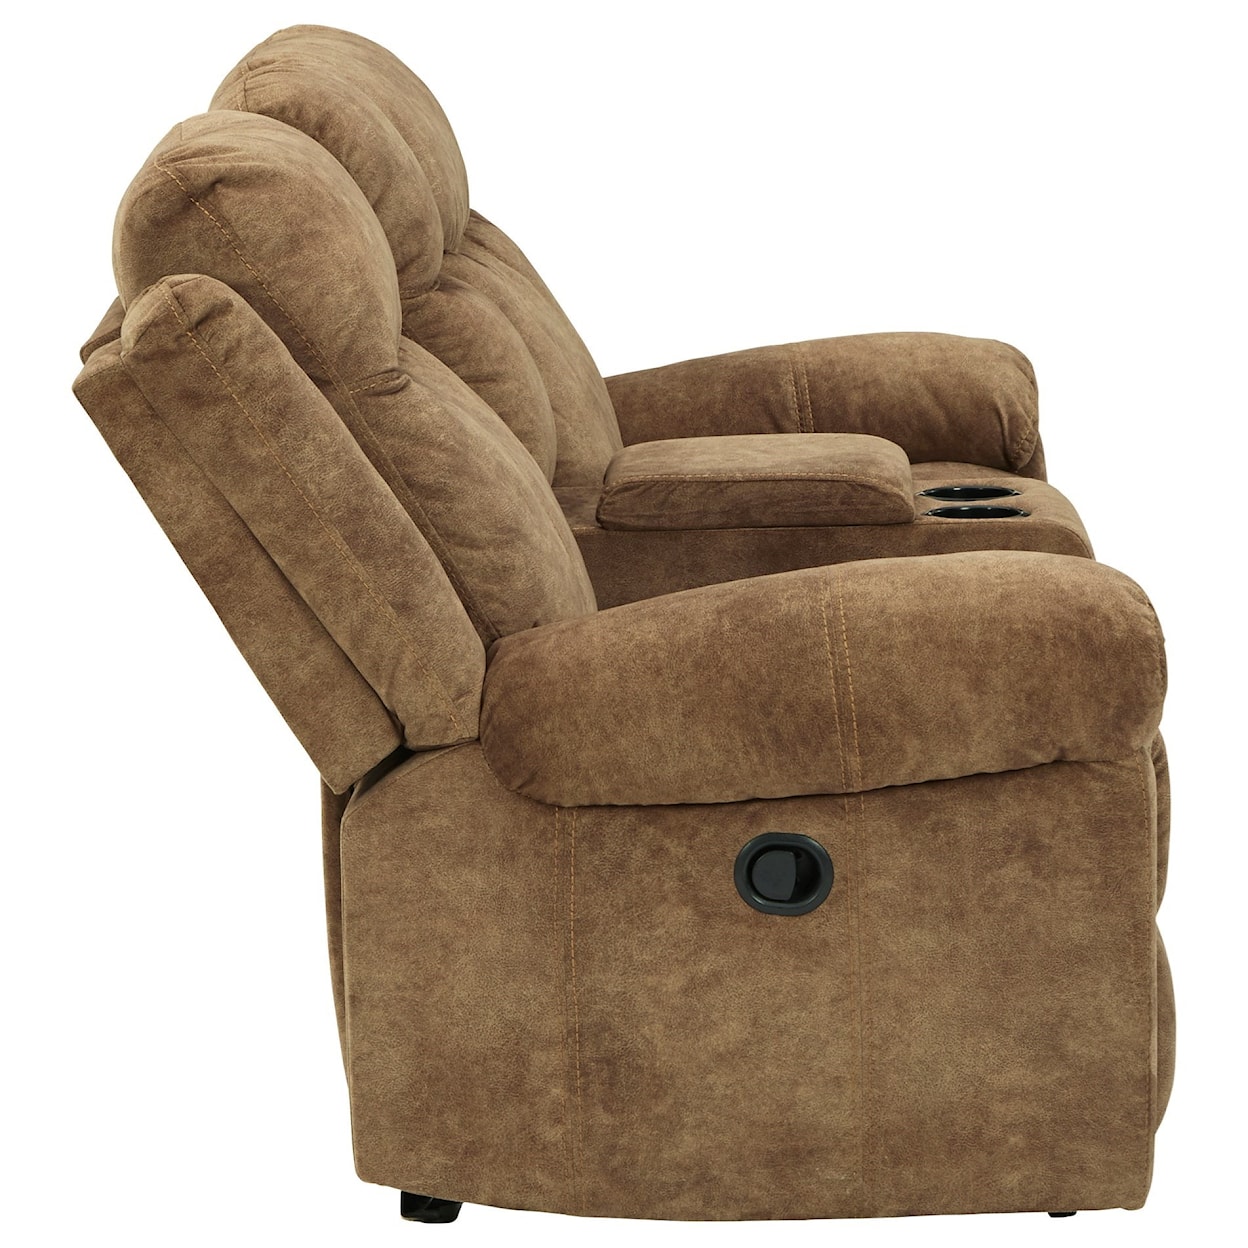 Benchcraft Huddle-Up Double Reclining Loveseat w/ Console